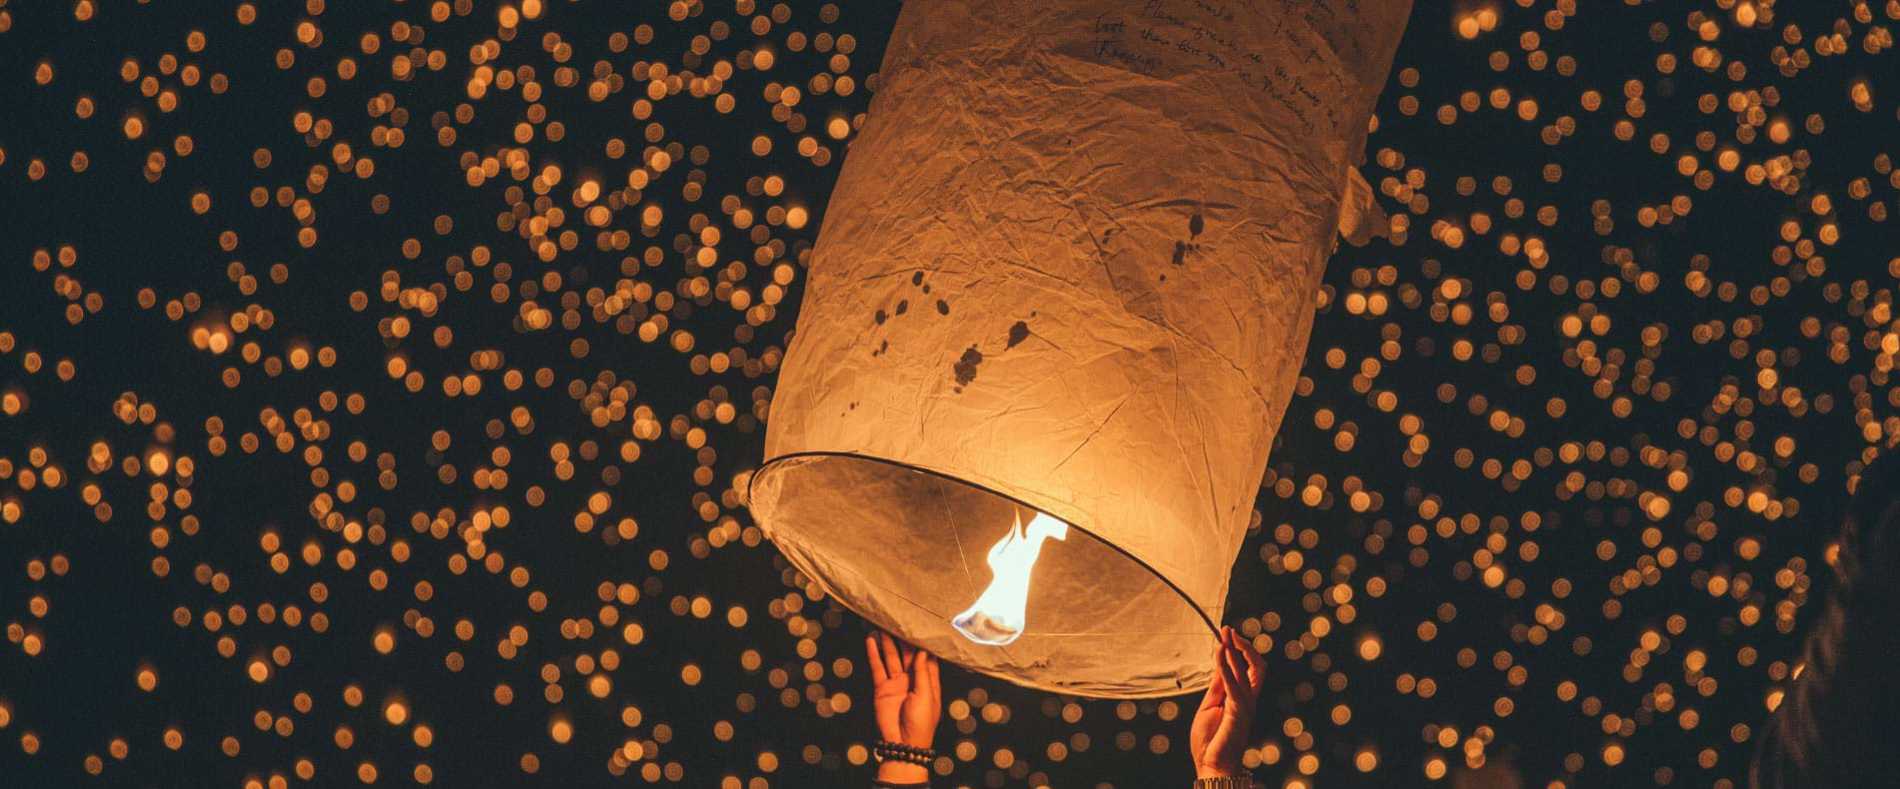 Paper lanterns in Chiang Mai, Thailand